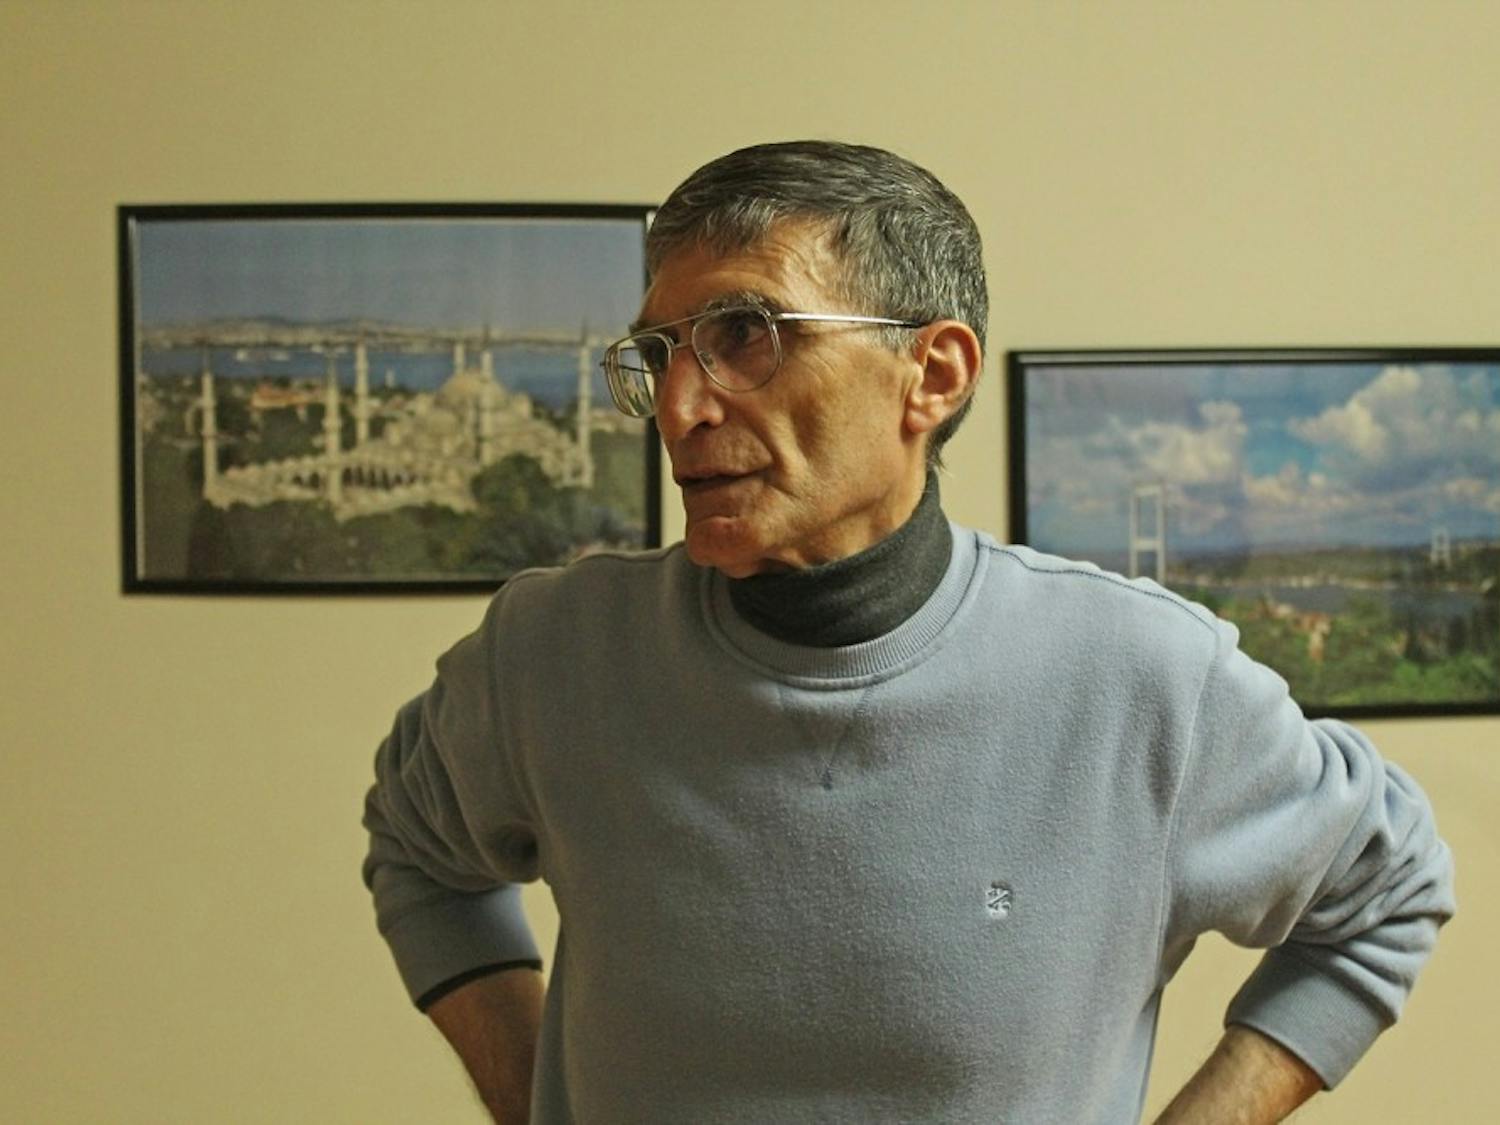 Aziz Sancar stands in the home he owns and runs for students from Turkey to adjust to life at UNC on Wednesday Oct. 28, 2015.